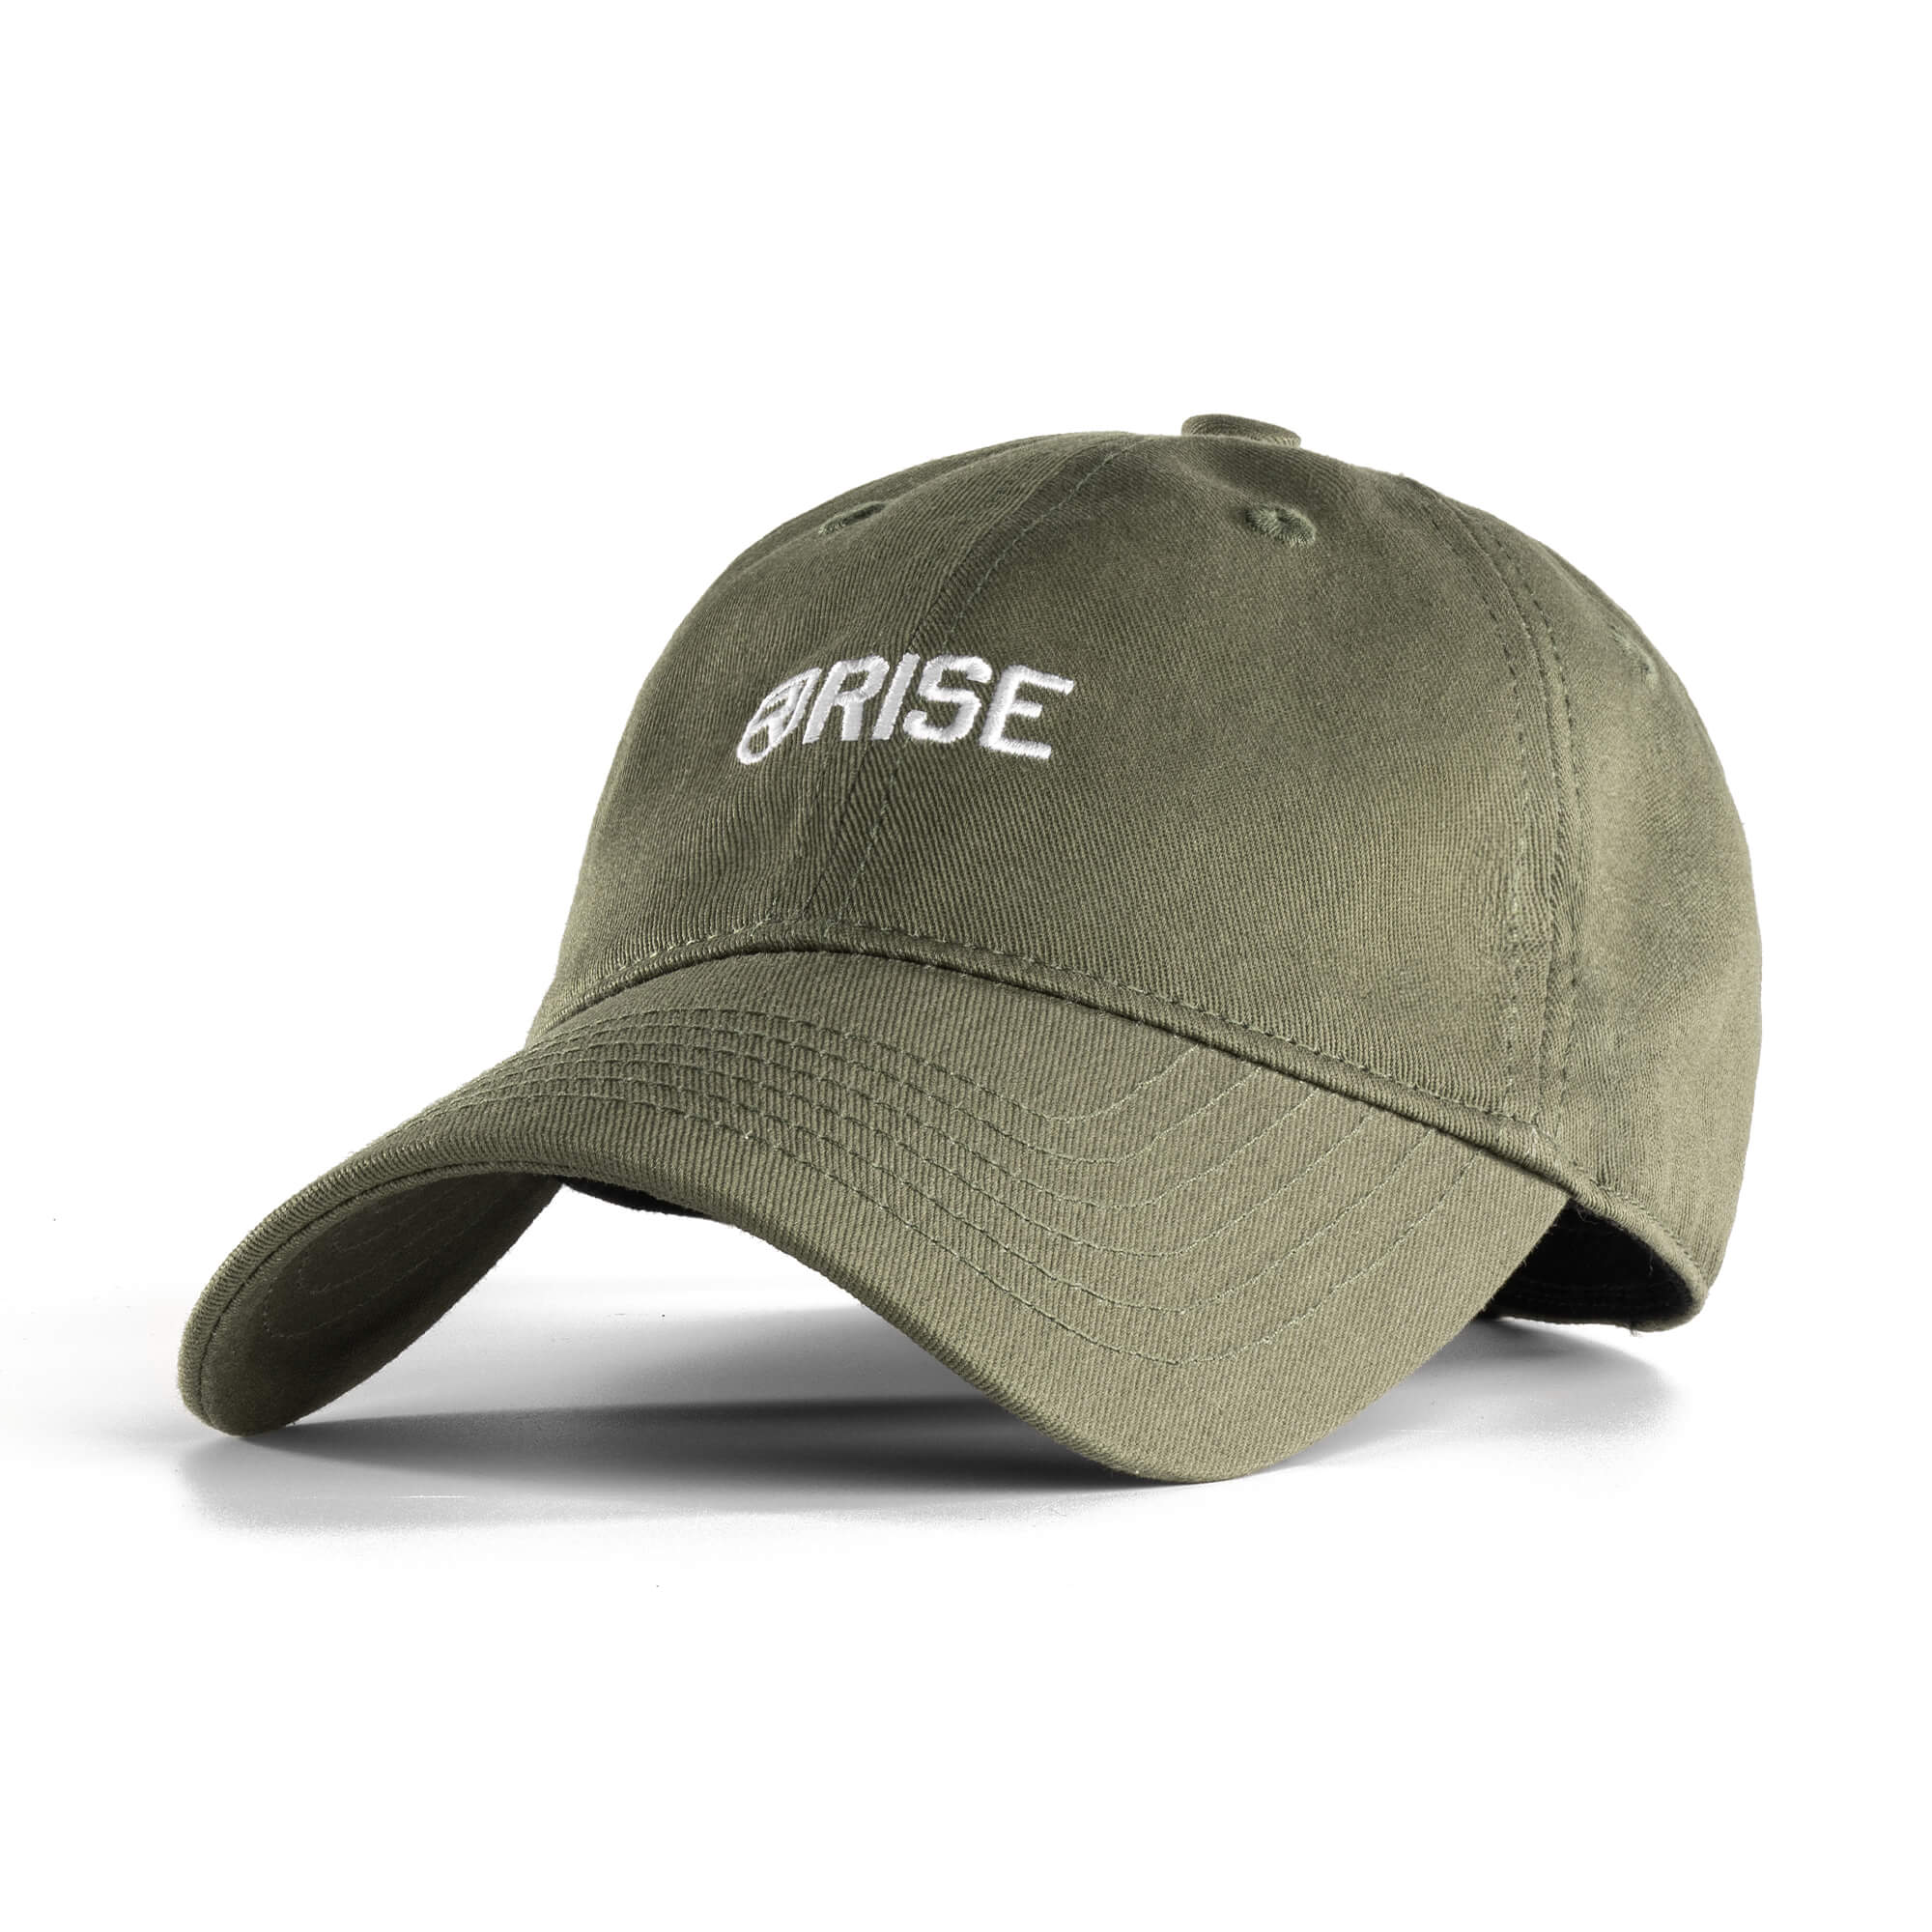 Signature Dad Hat - Army Green